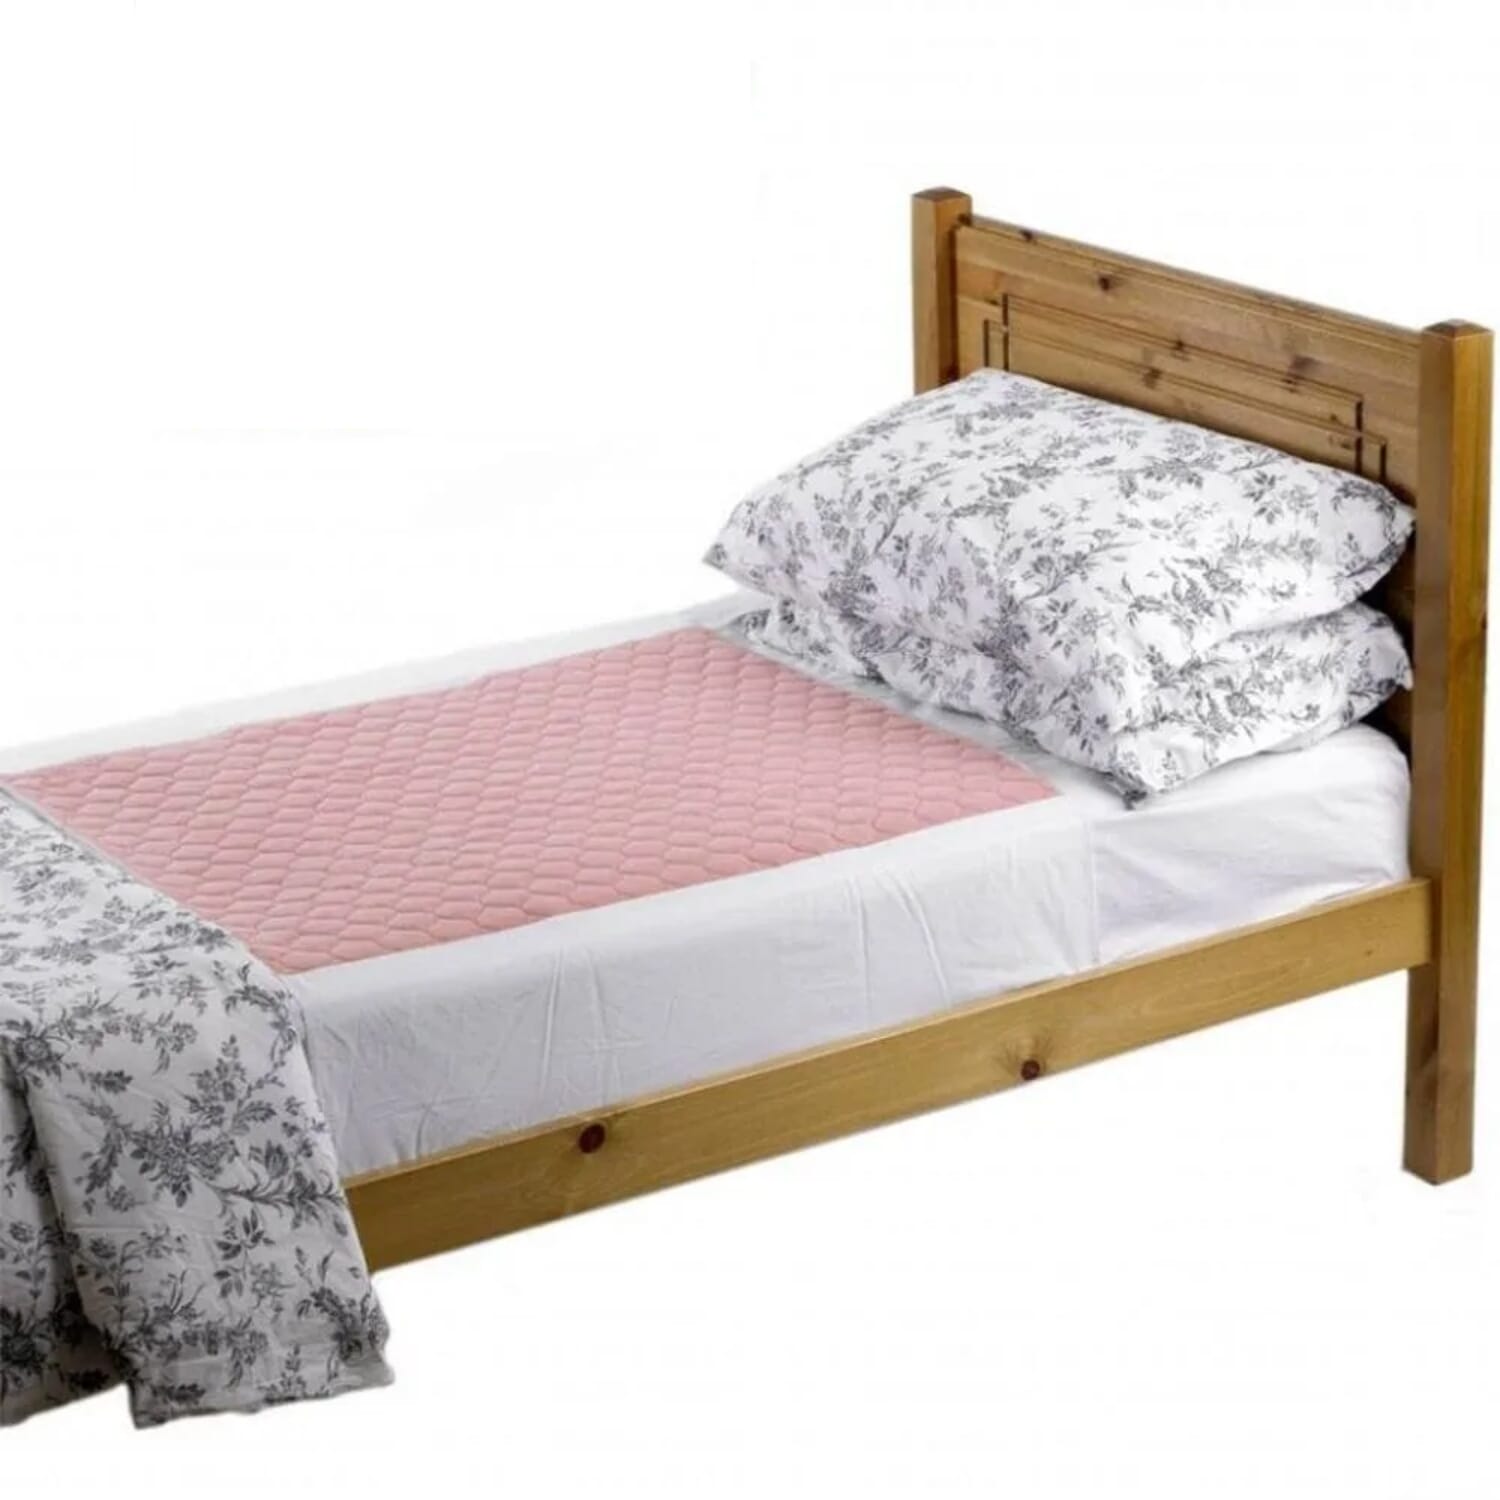 View Kylie Bed Pad 91 x 91cm 3 Litres Pink information